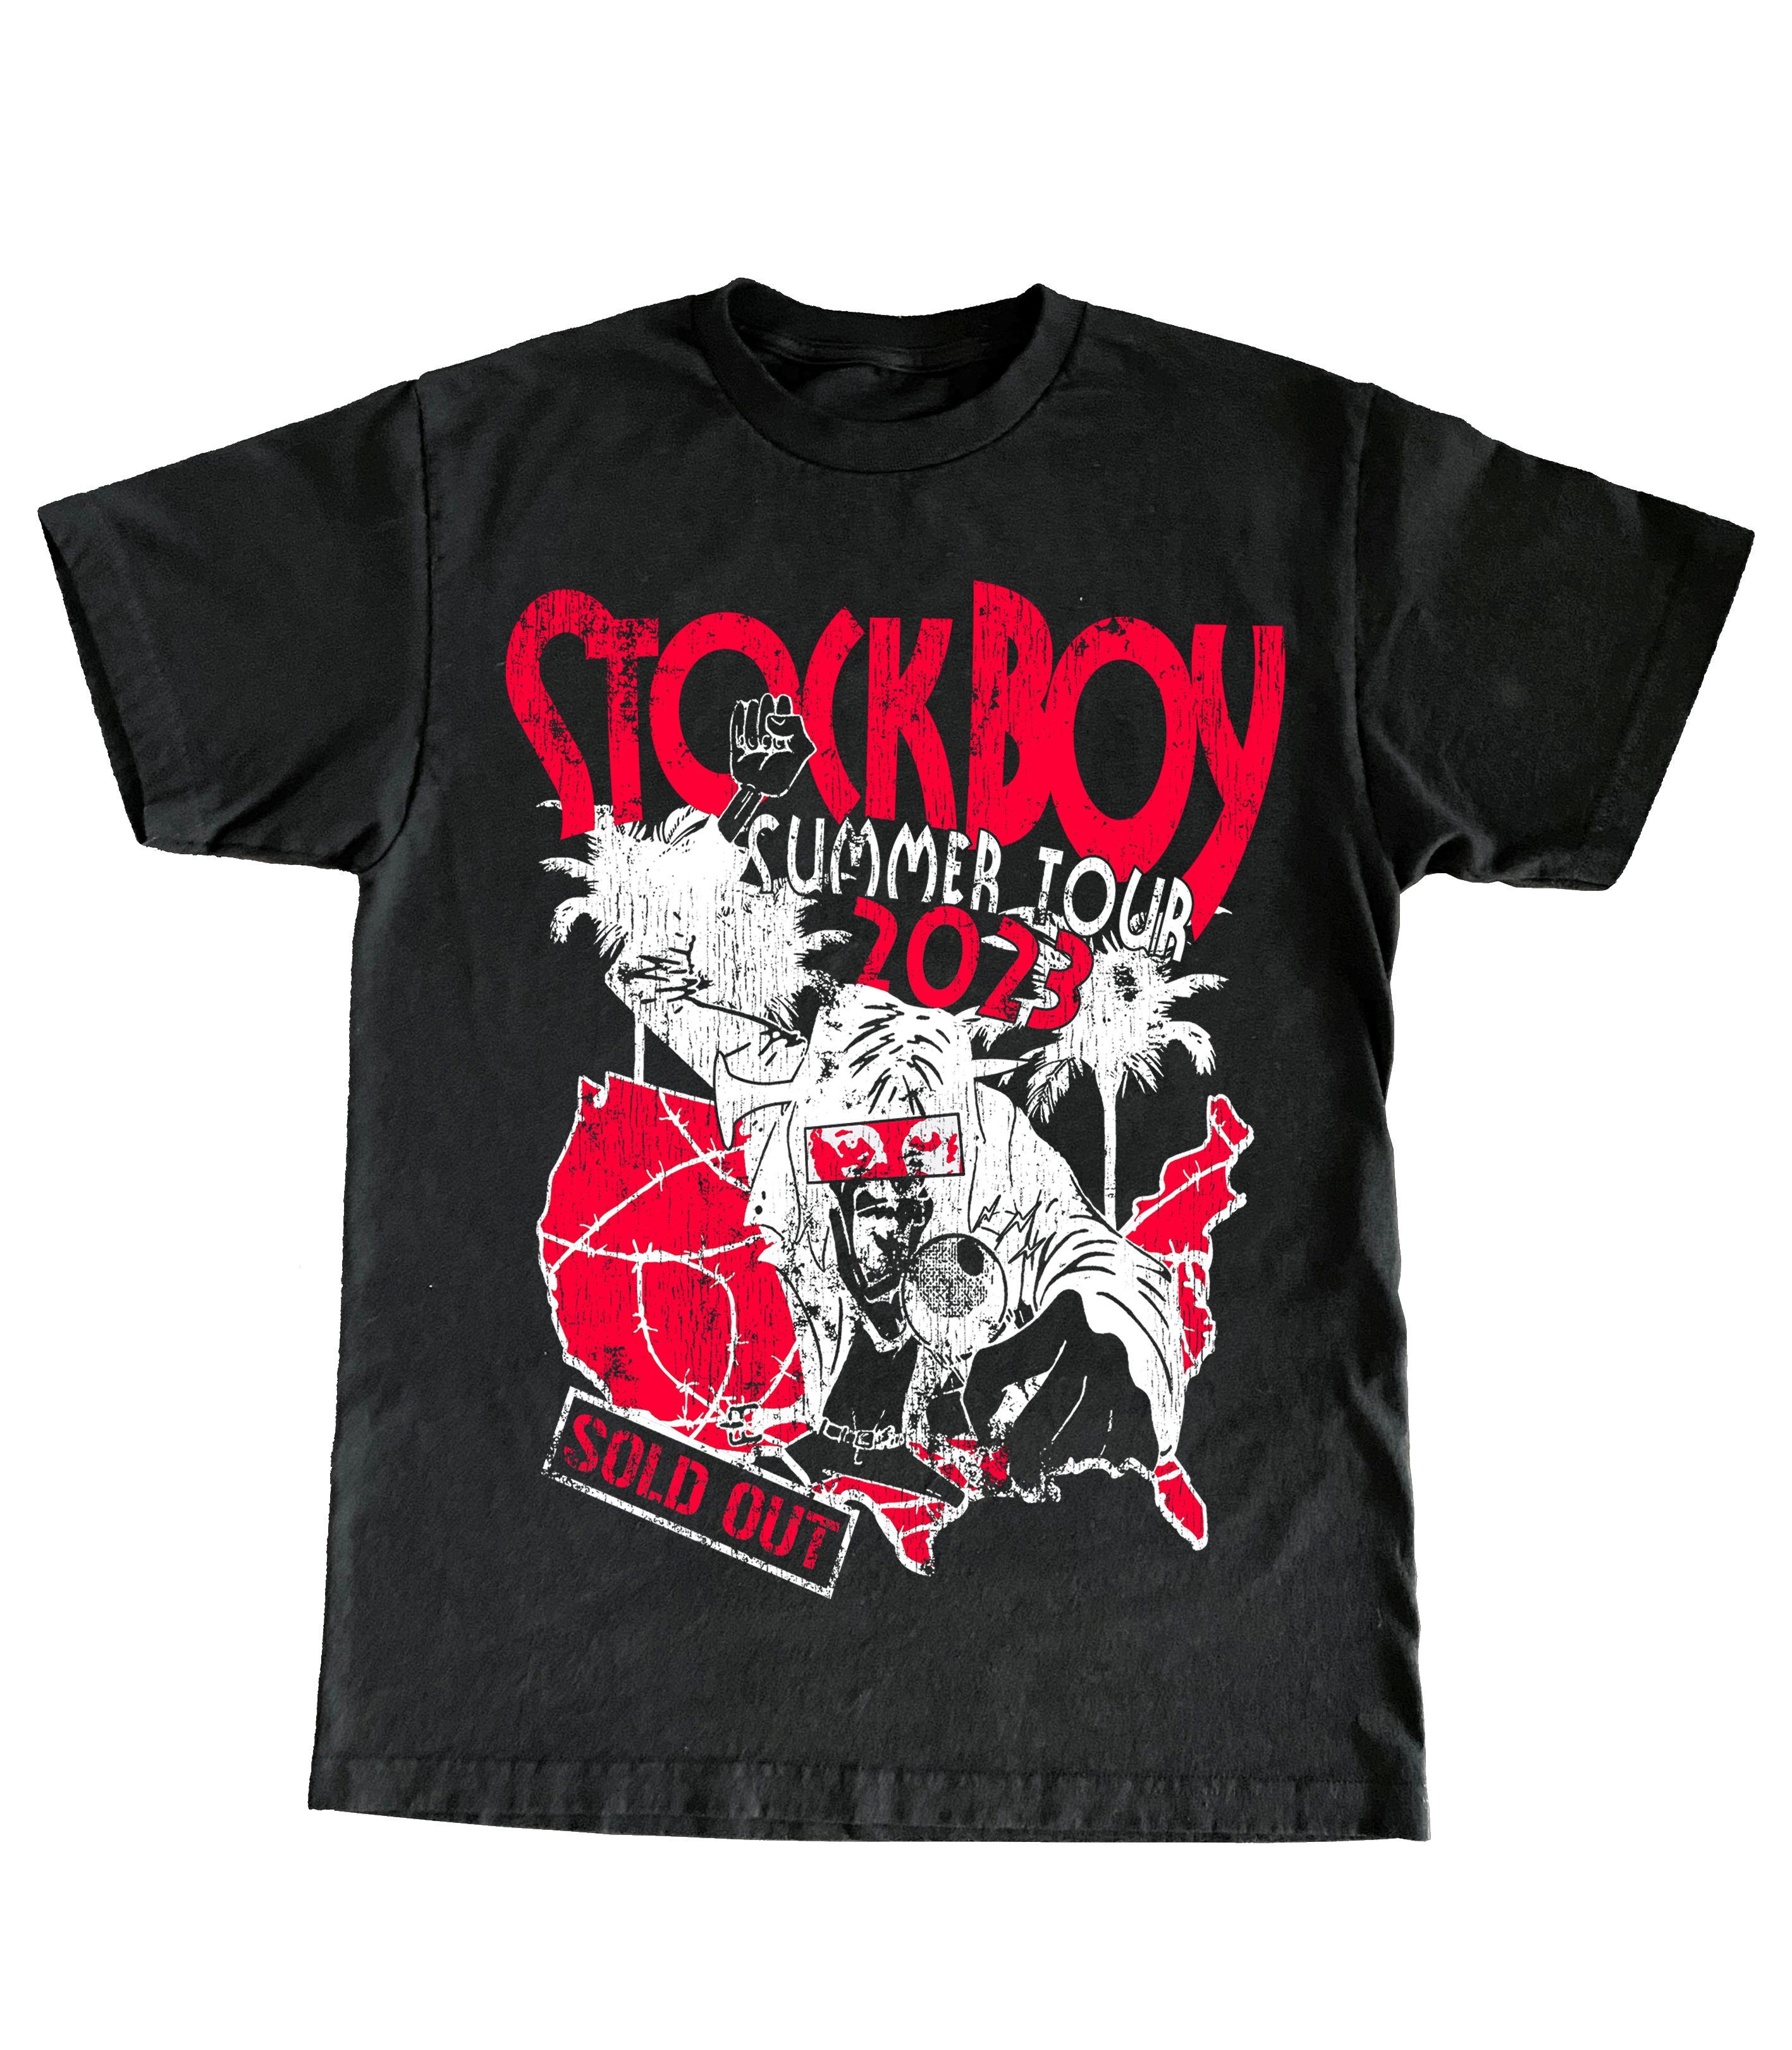 StockBoy 2023 Summer Tour Tee 15 USD (Sold Out)